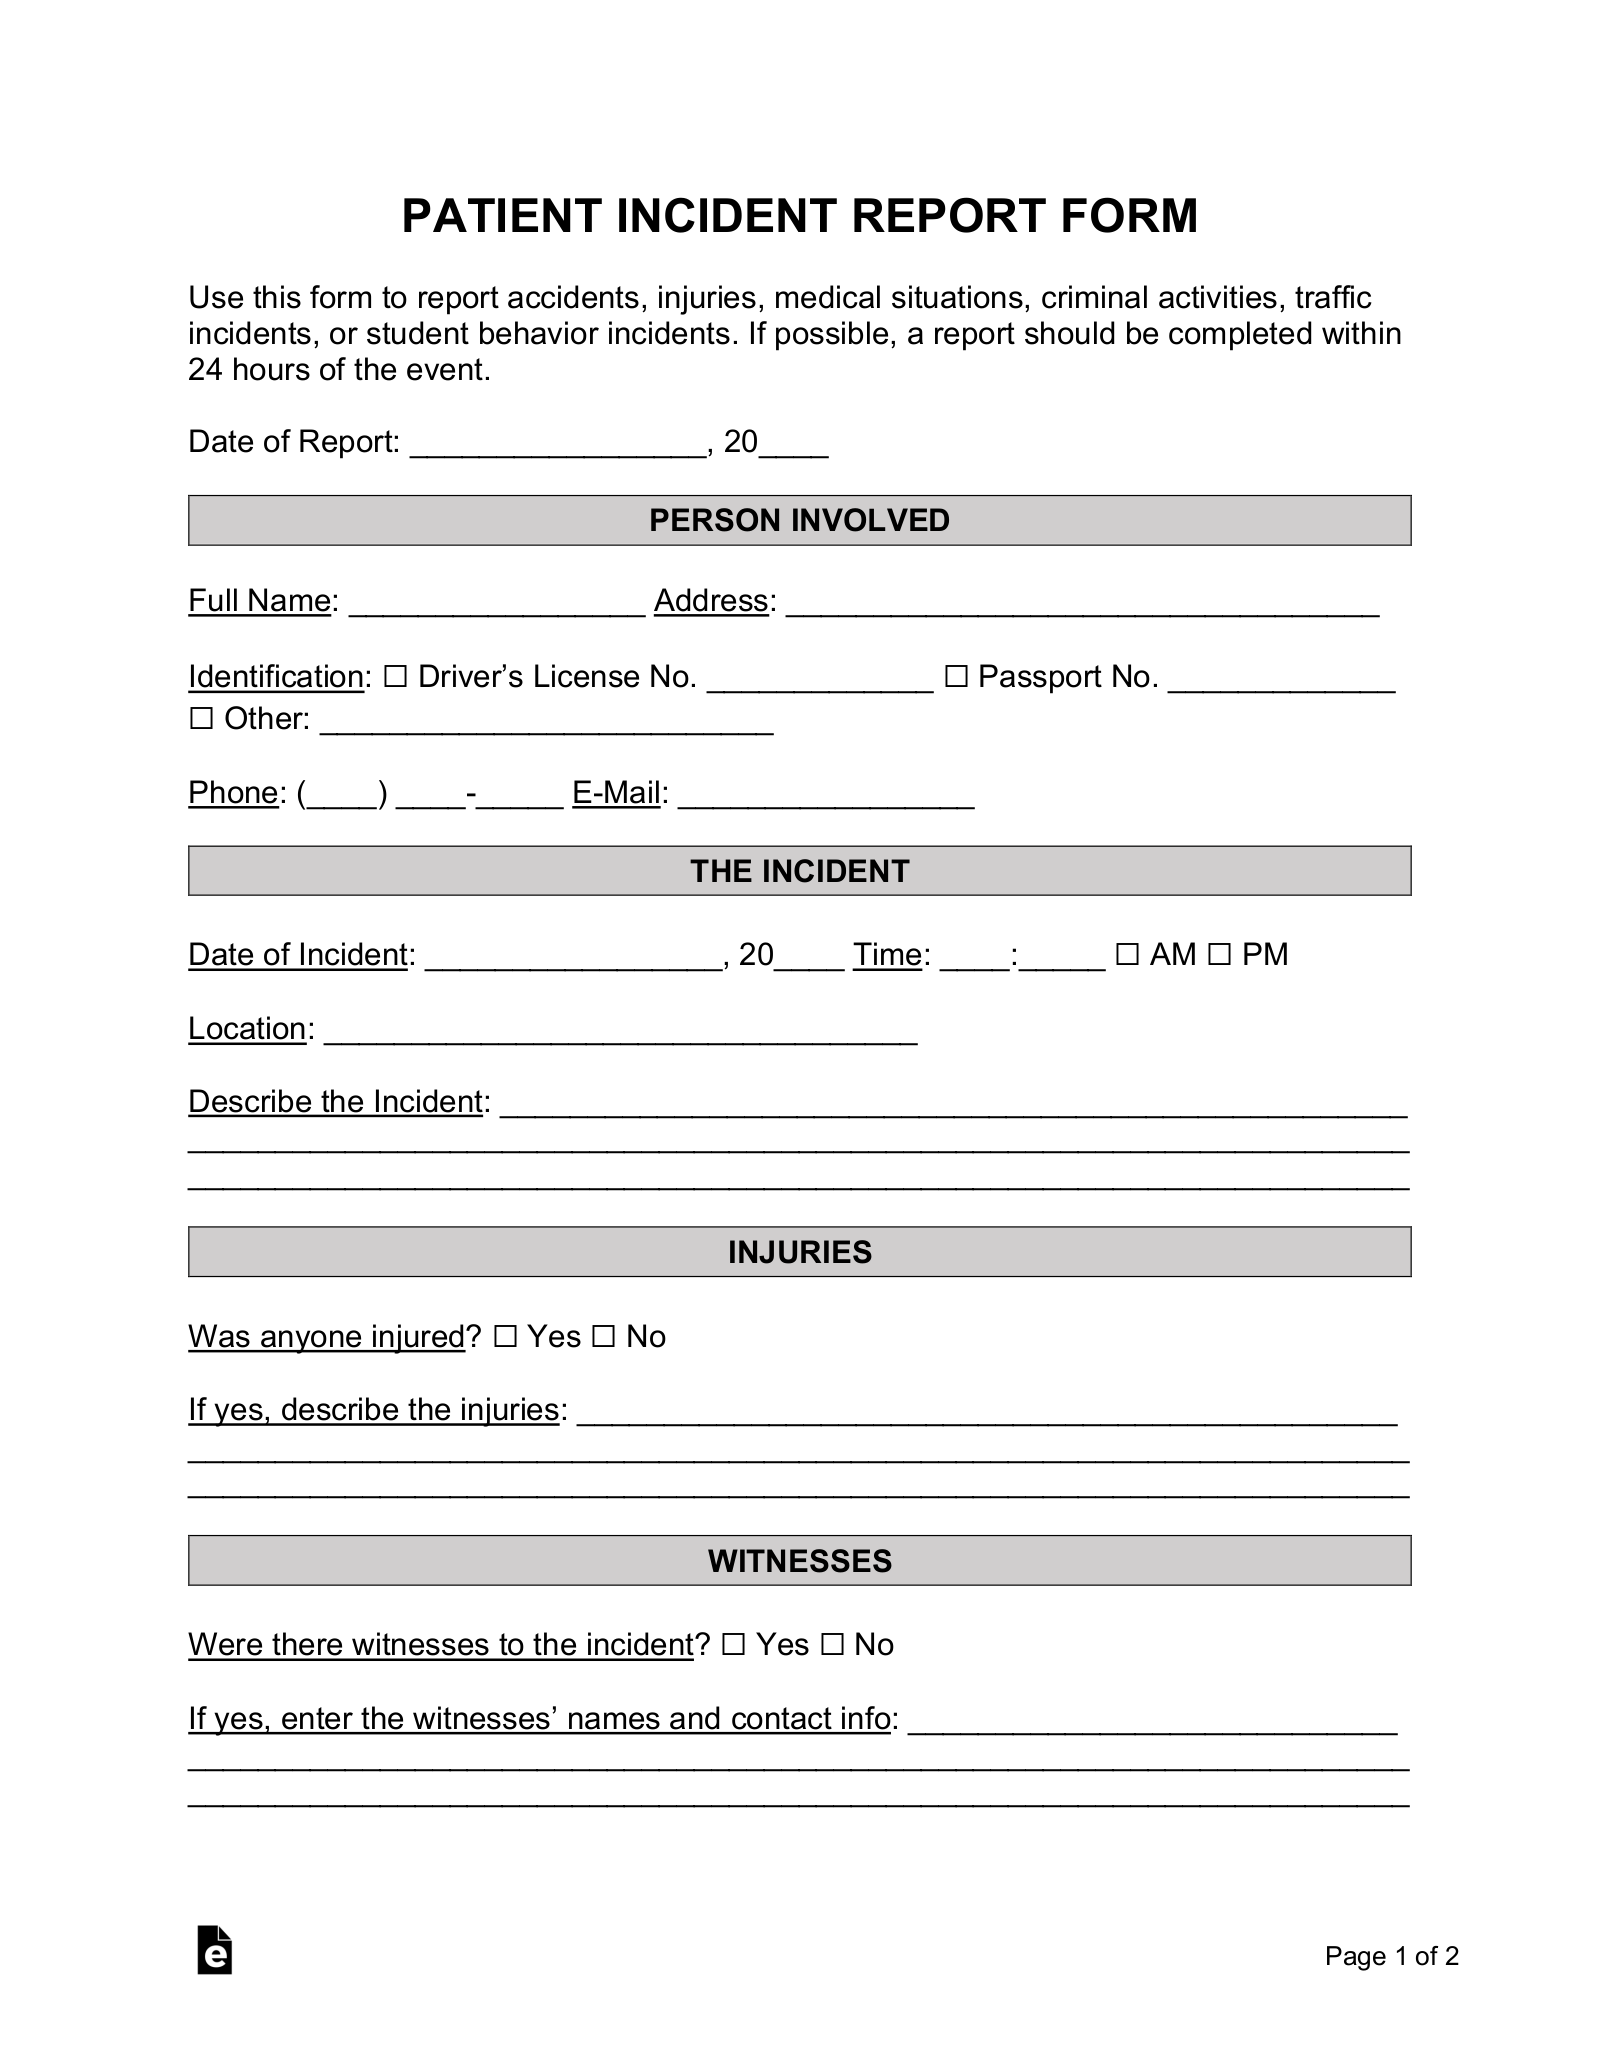 free-patient-medical-incident-report-form-pdf-word-eforms